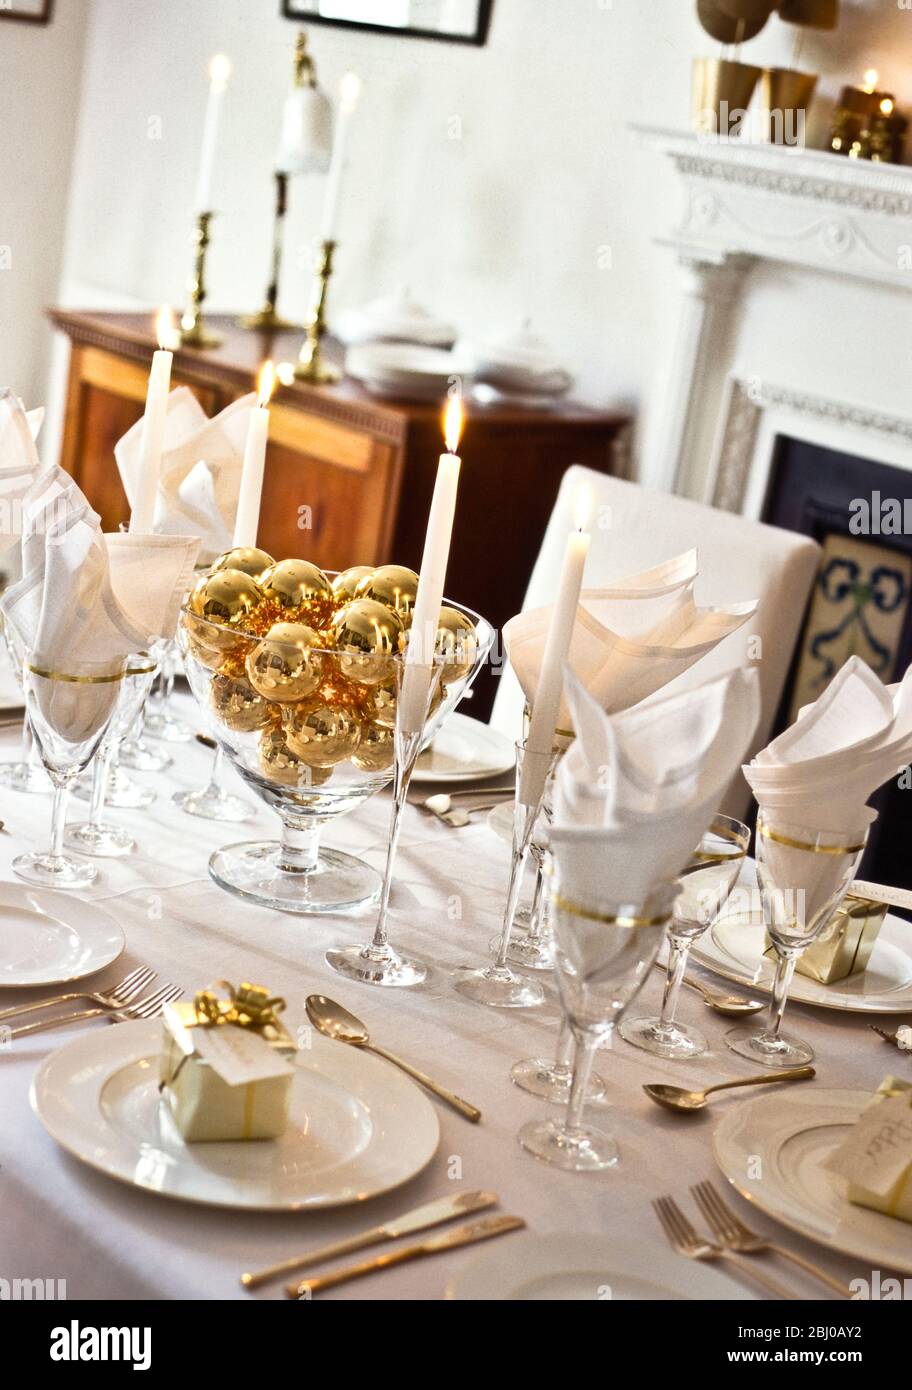 Table laid for Chritmas or a special occasion such as a Golden wedding party in elegant white dining room - Stock Photo